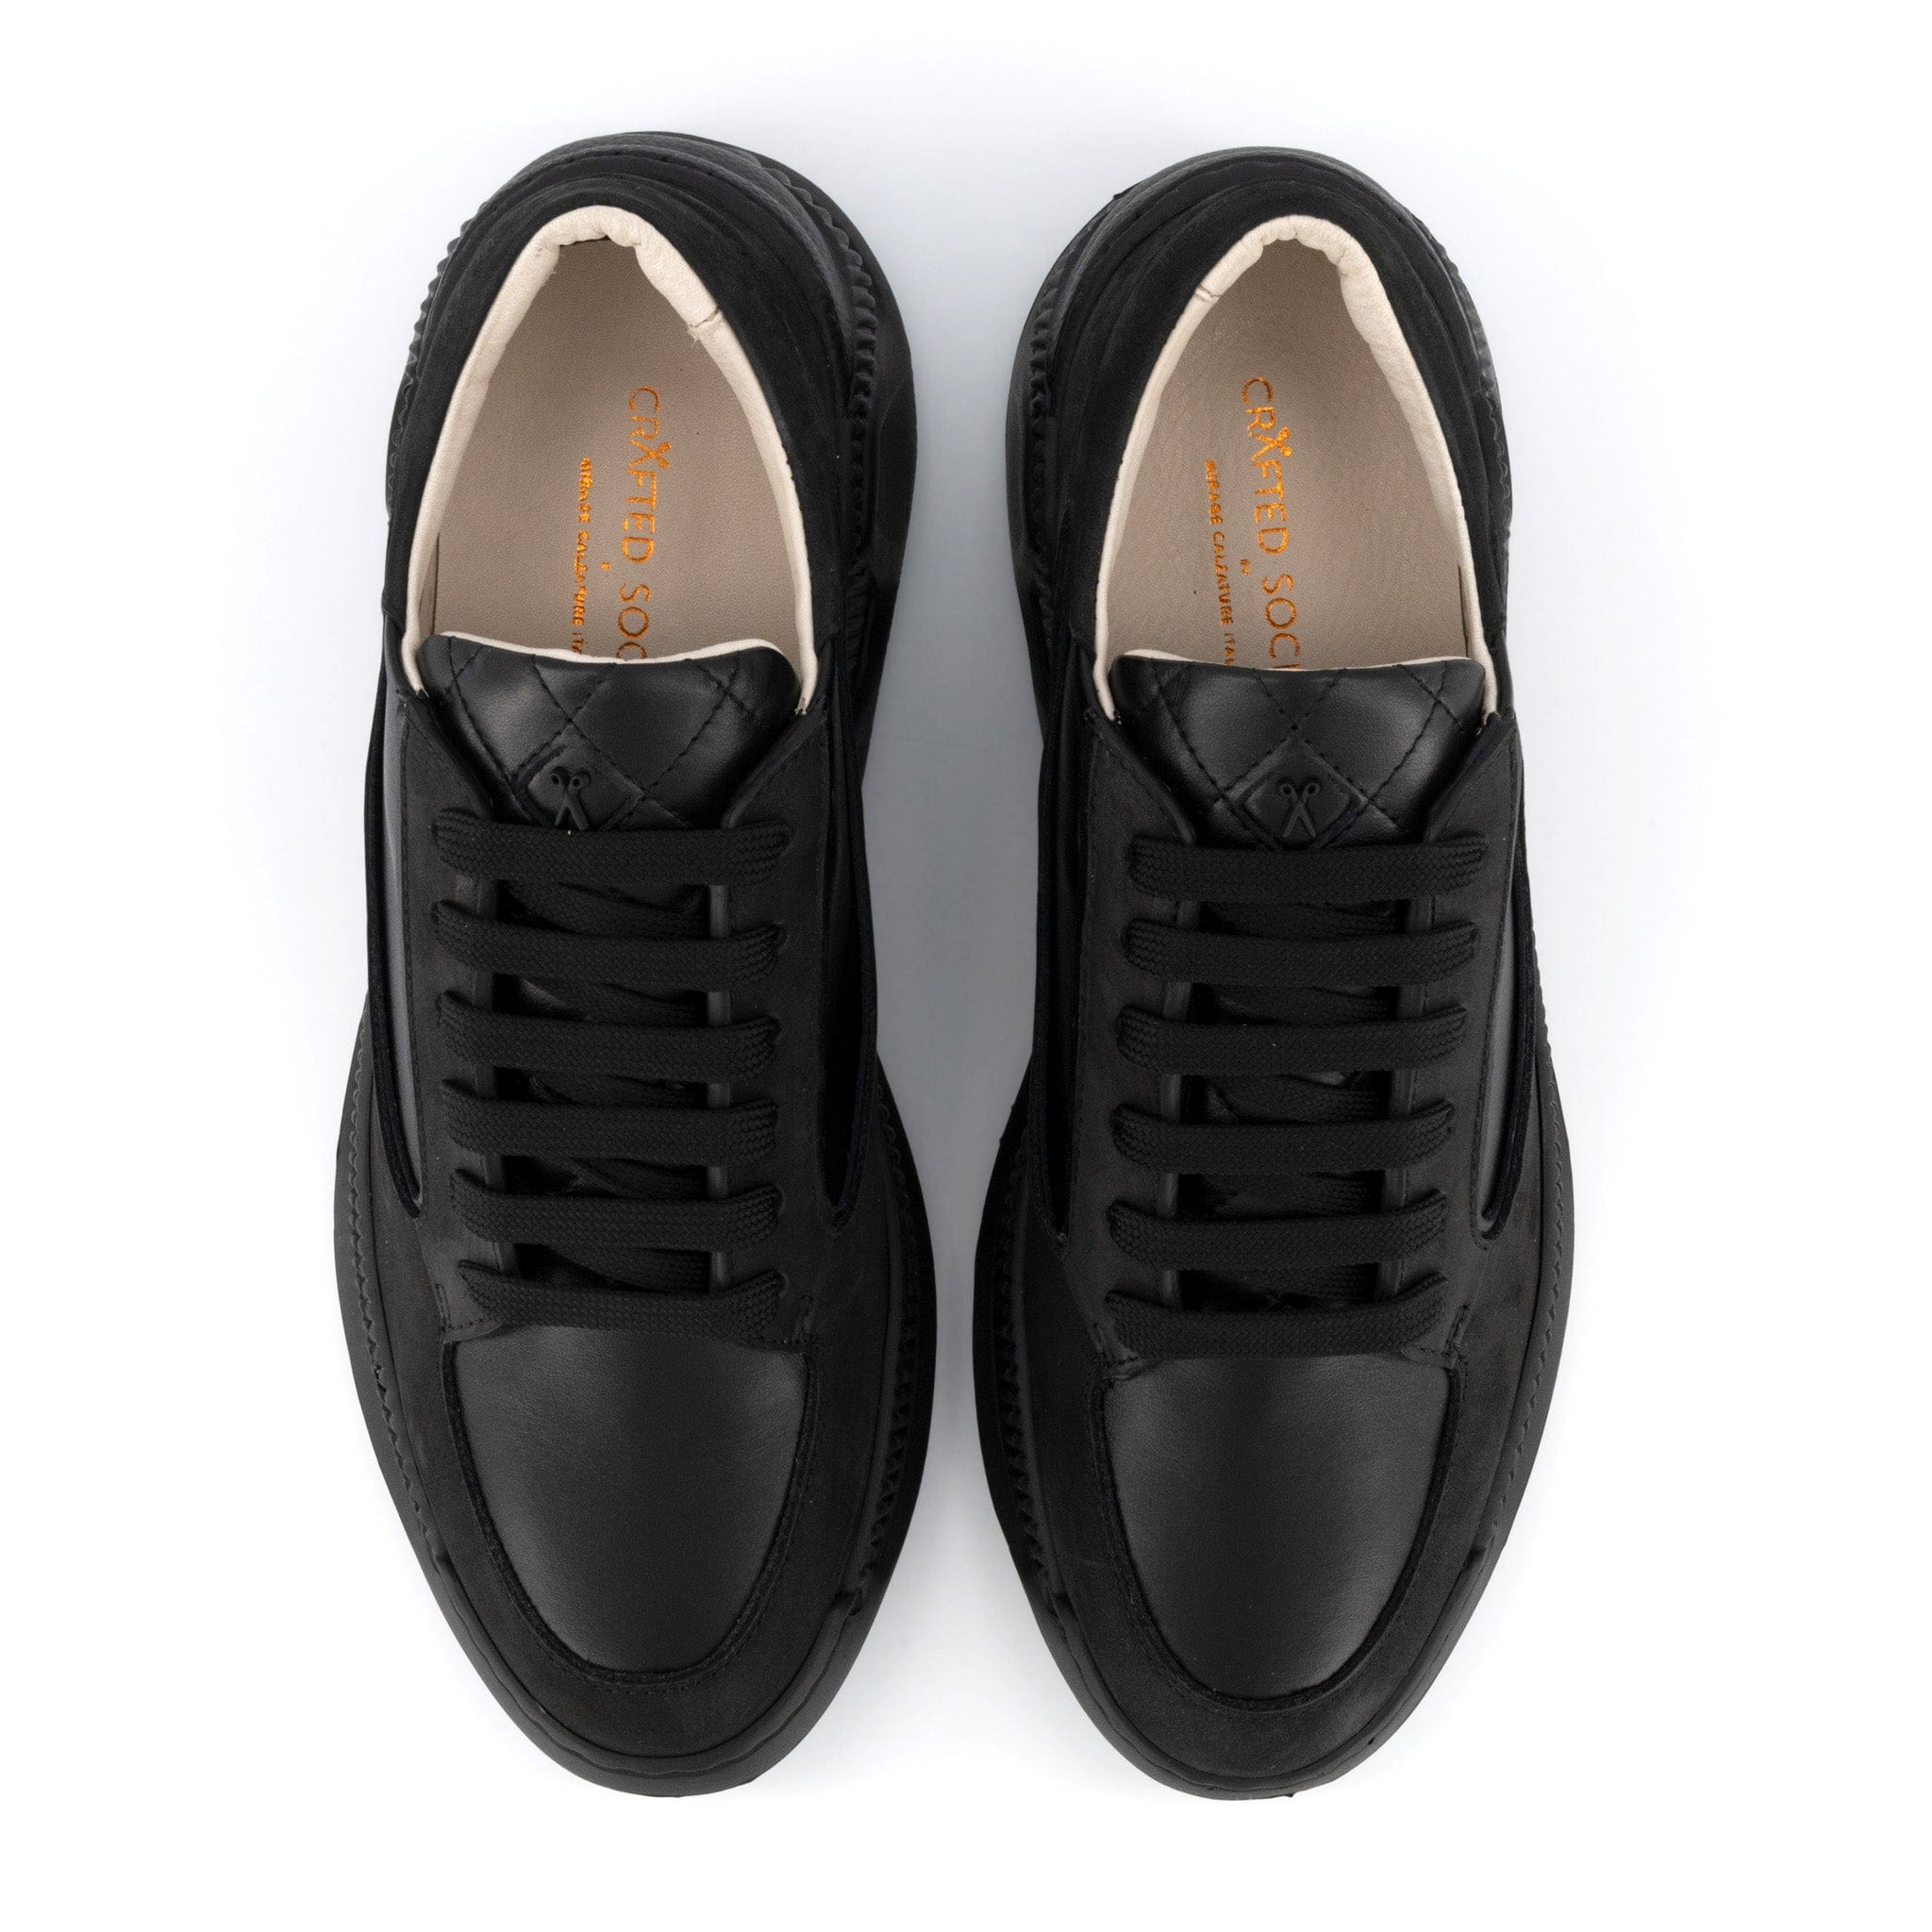 Nesto Low Top Italian Leather Sneaker | All Black | Black Outsole | Made in Italy